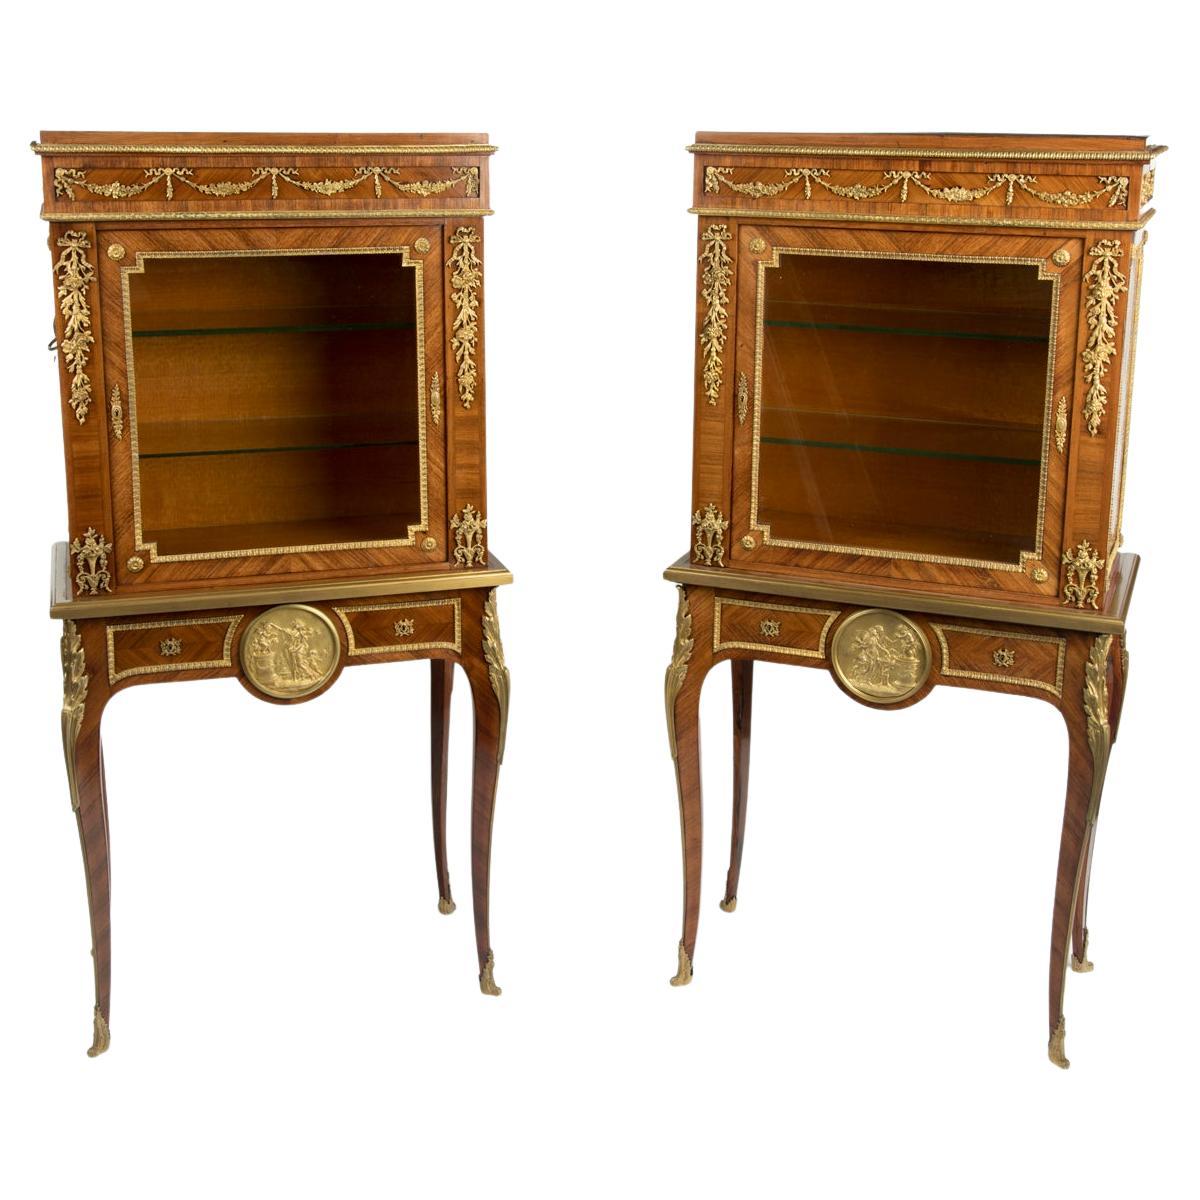 A pair of small Napoleon III kingwood display cabinets on stands